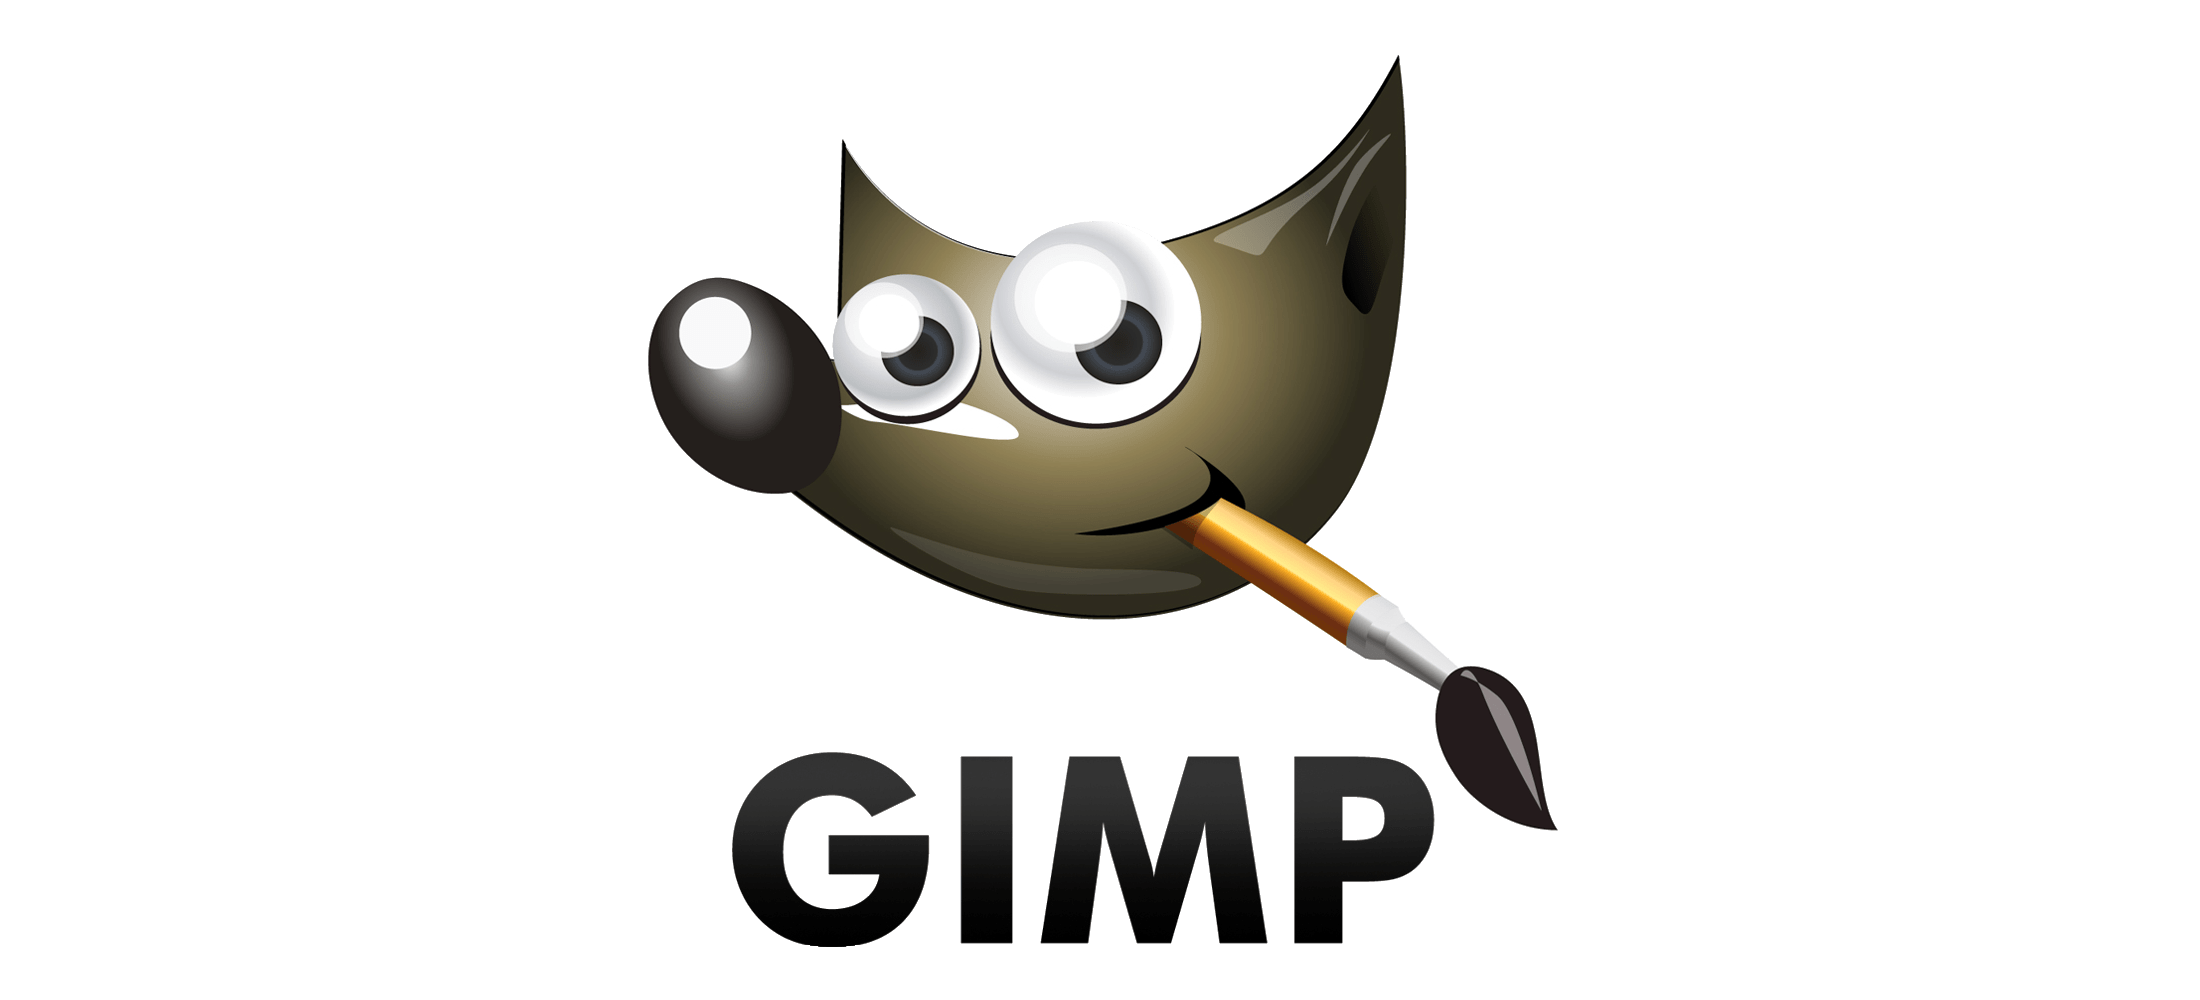 Best Free Gimp Tutorials on Drawing & Painting